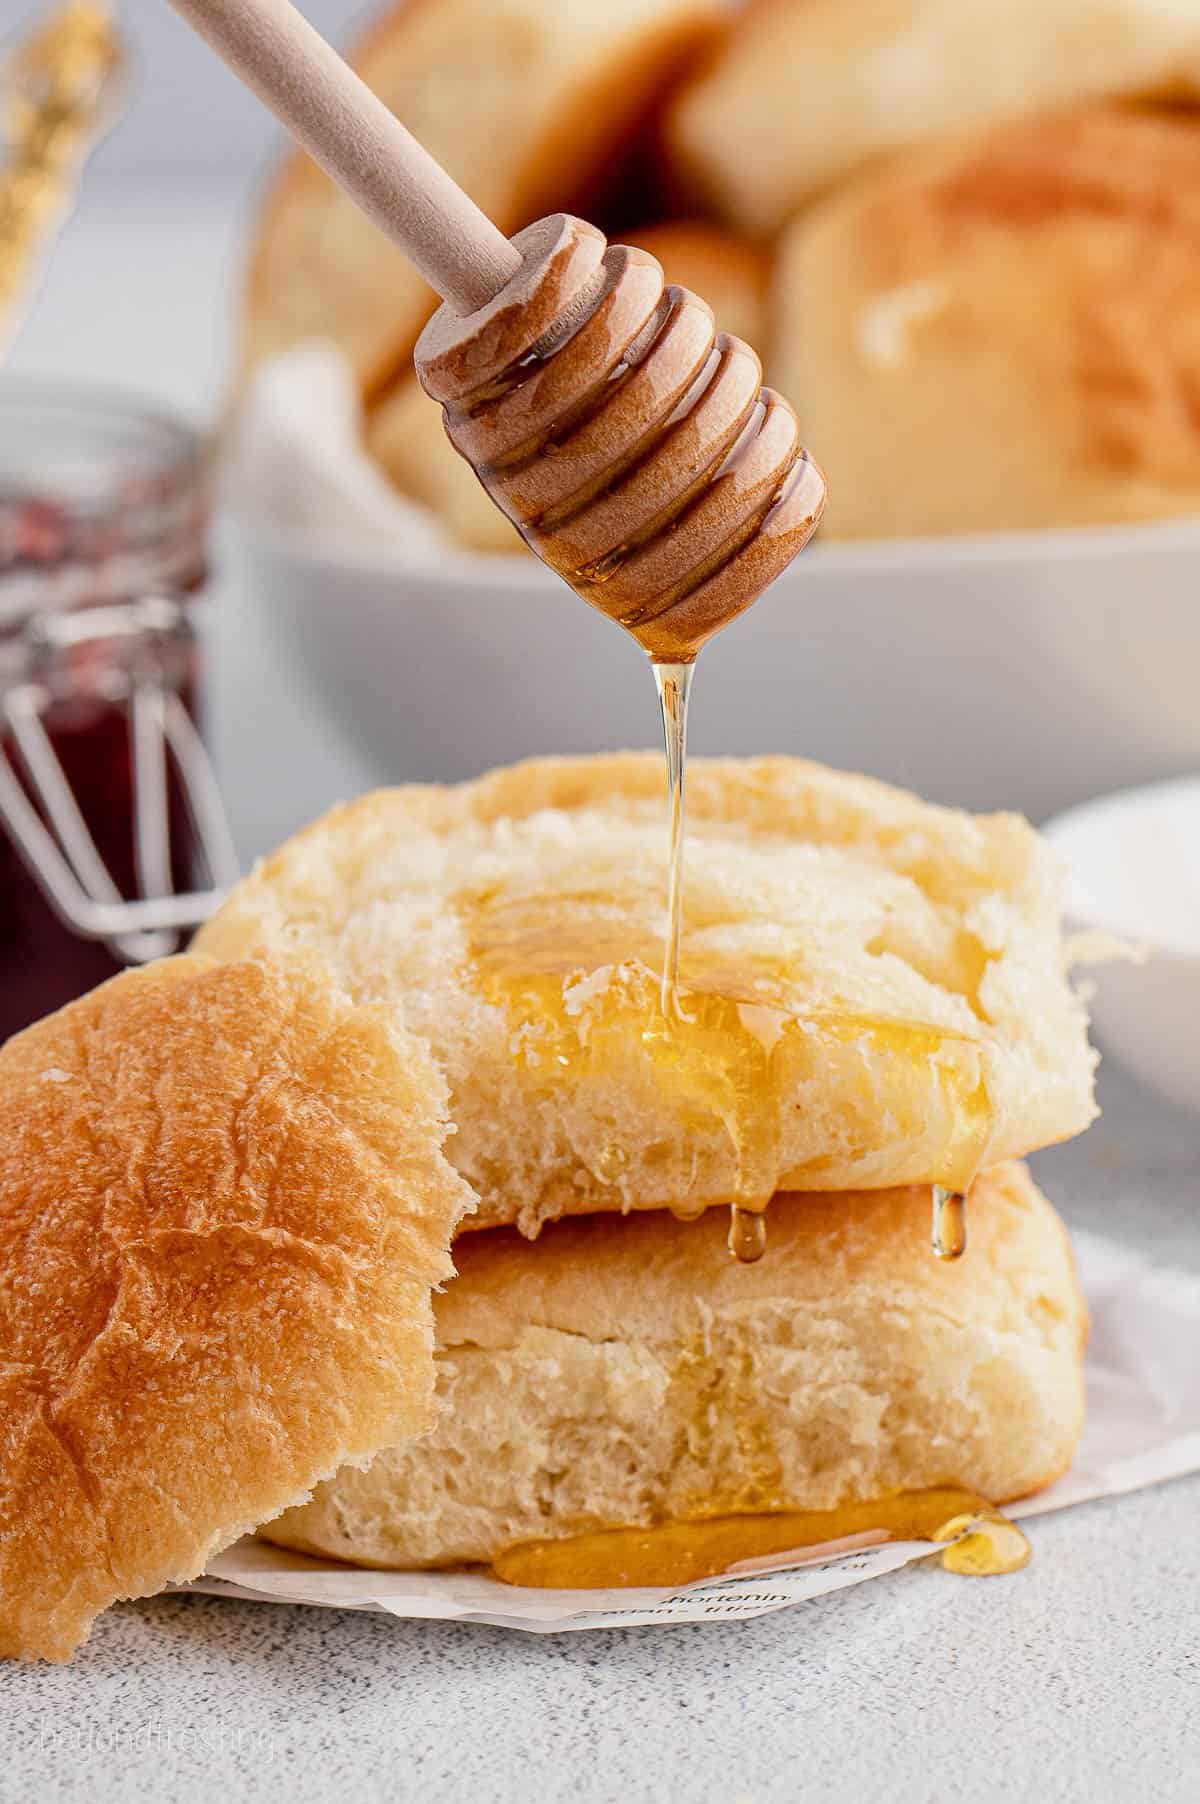 Honey being drizzled over homemade rolls